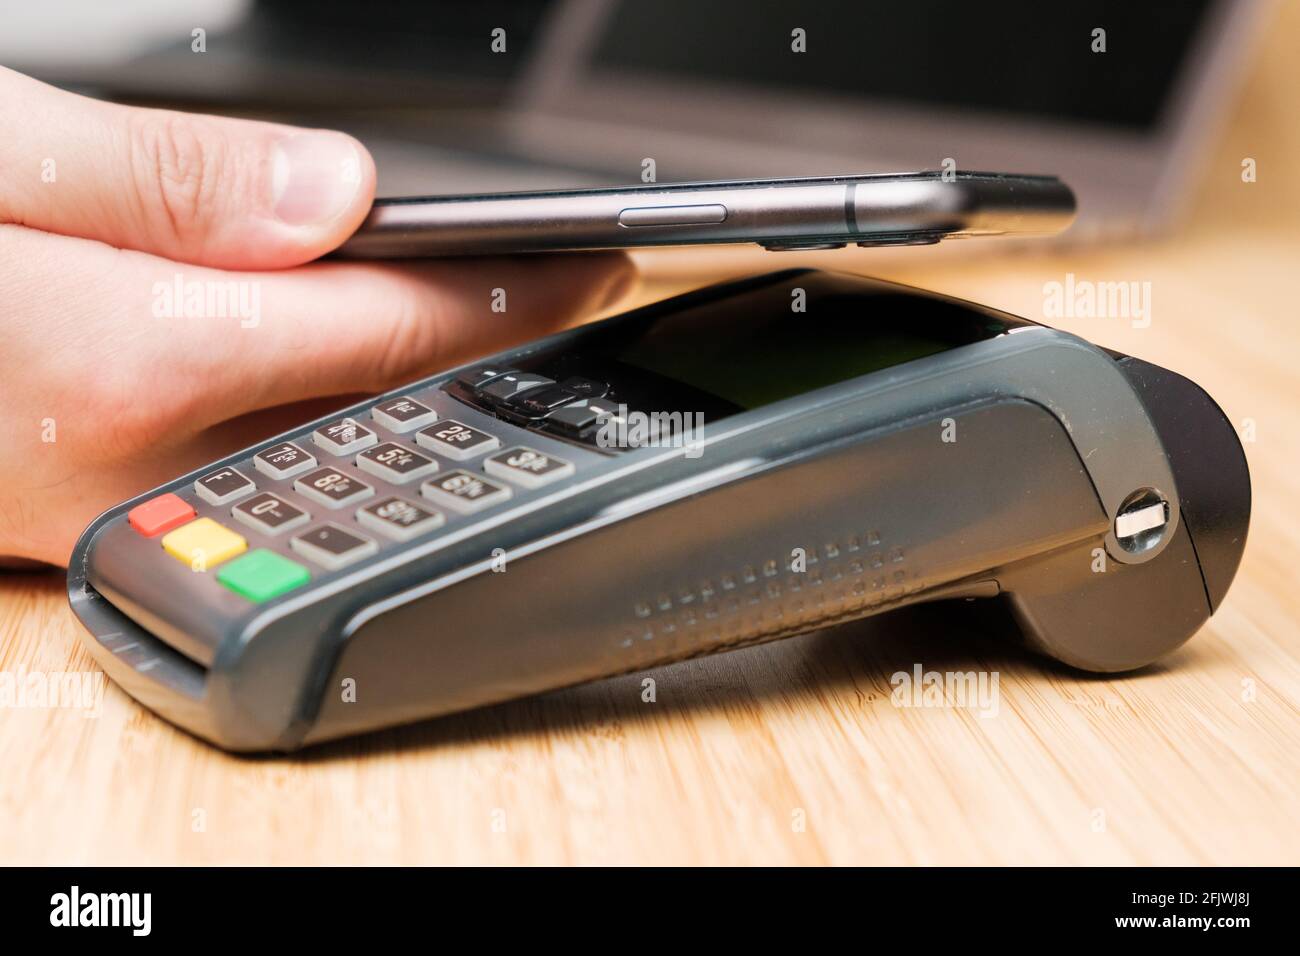 Man uses wireless terminal contactless payment with smartphone Stock Photo